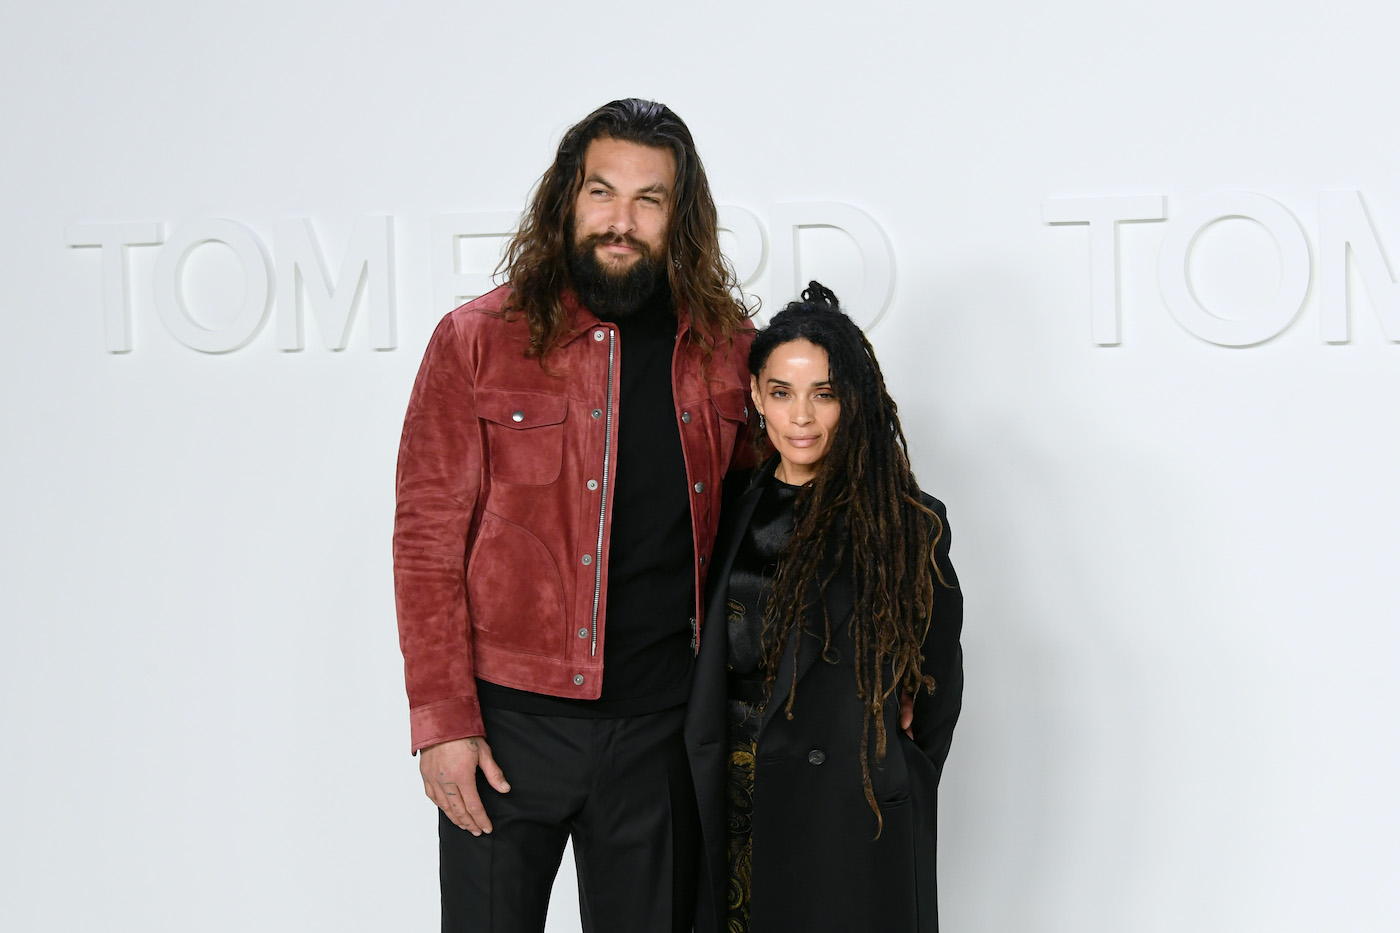 Jason Momoa and Lisa Bonet Could ‘Rekindle Their Adore,’ Astrologist Predicts